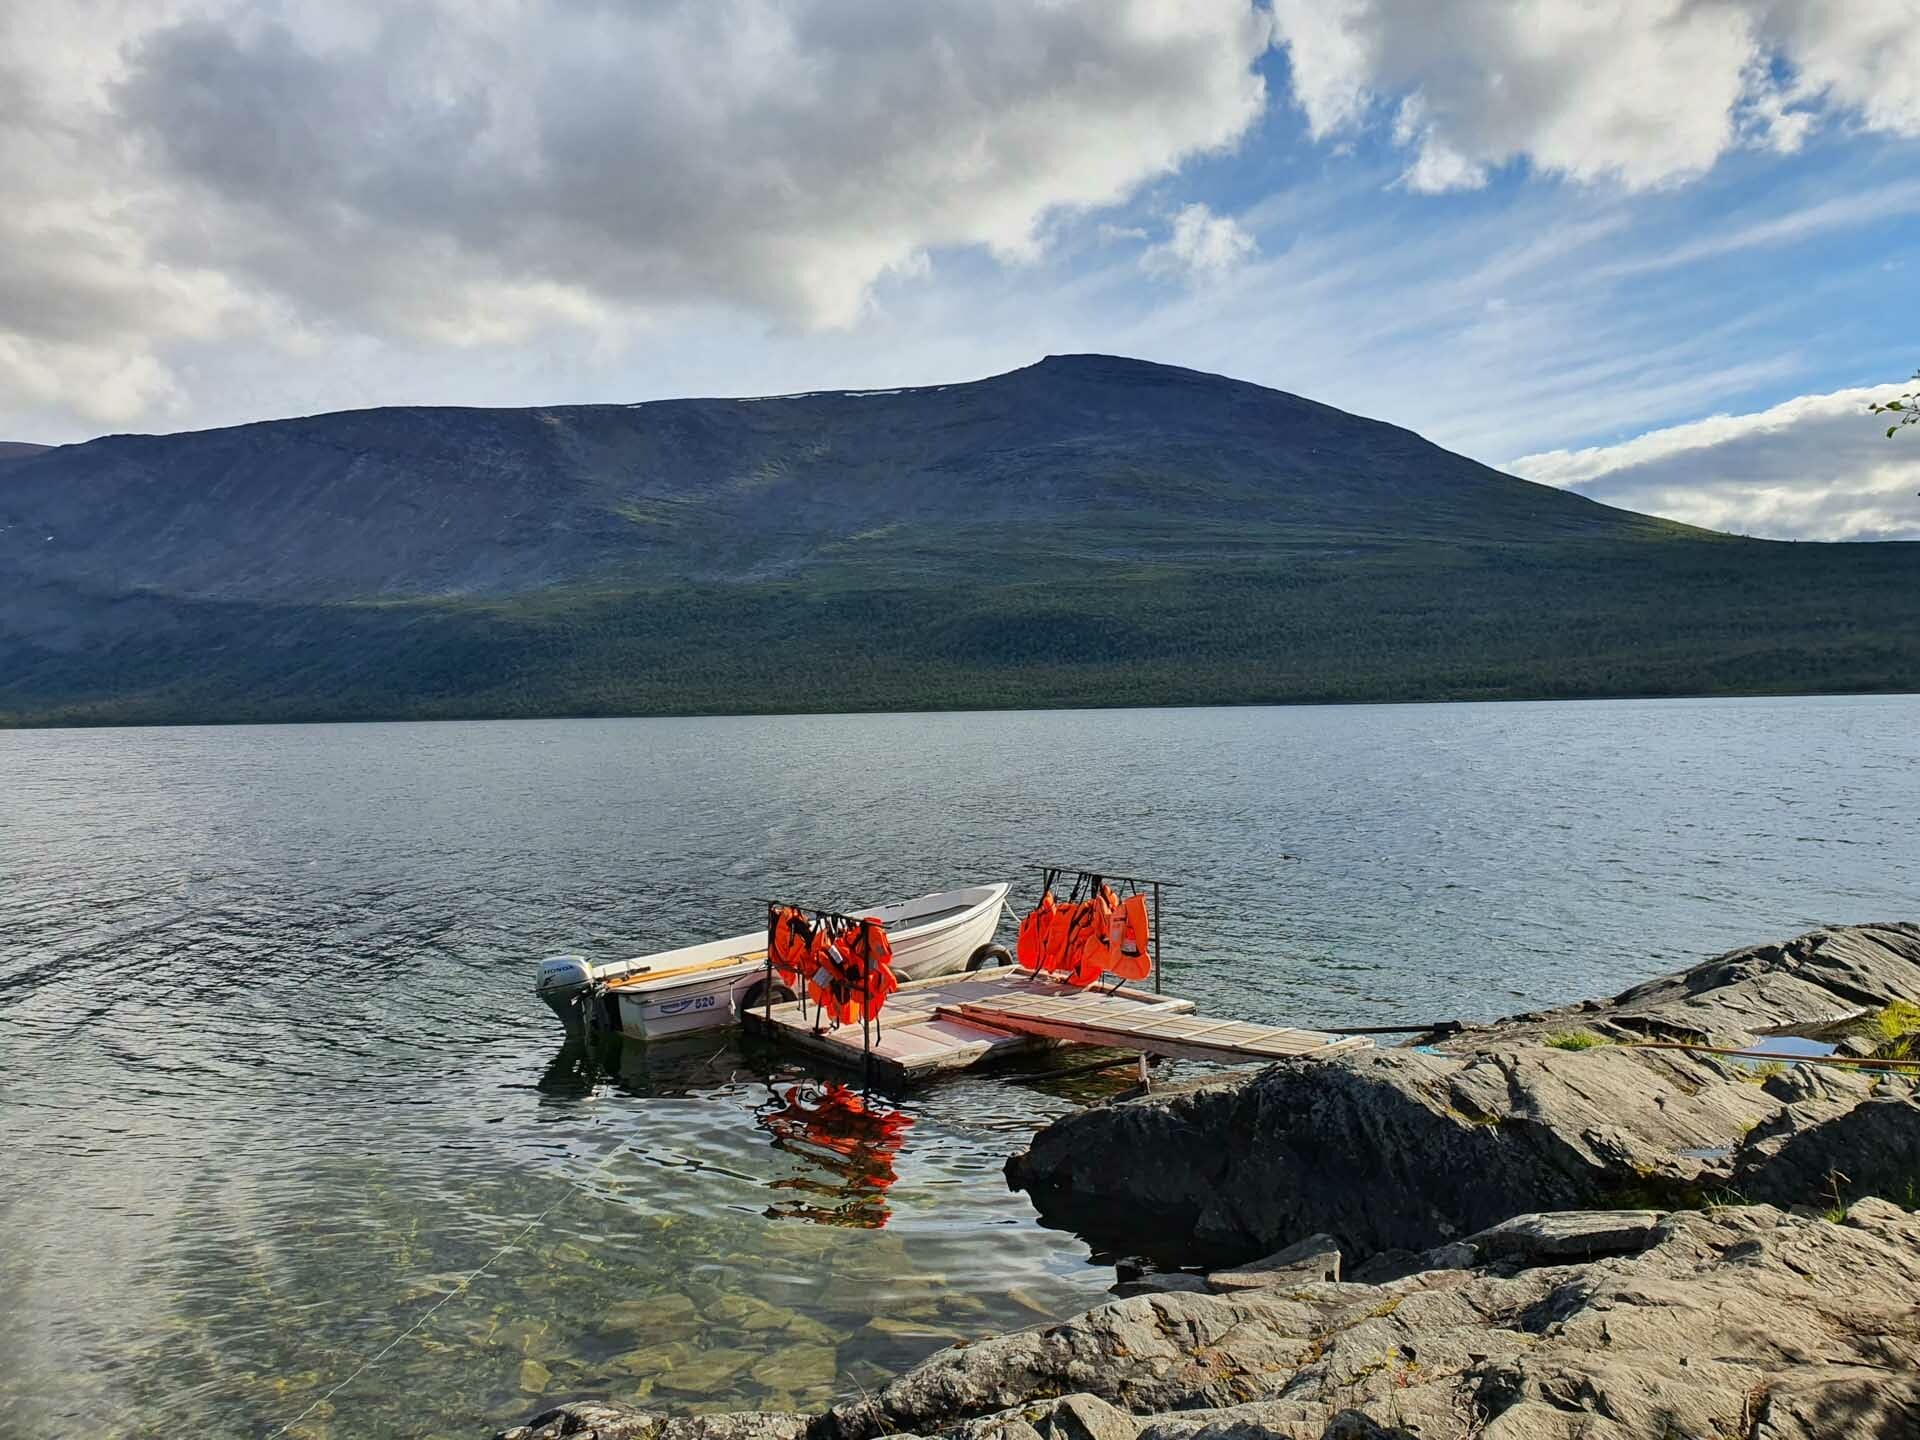 Kungsleden Overview: A Guide to Hiking the King’s Way (Sweden), saphira Schroers